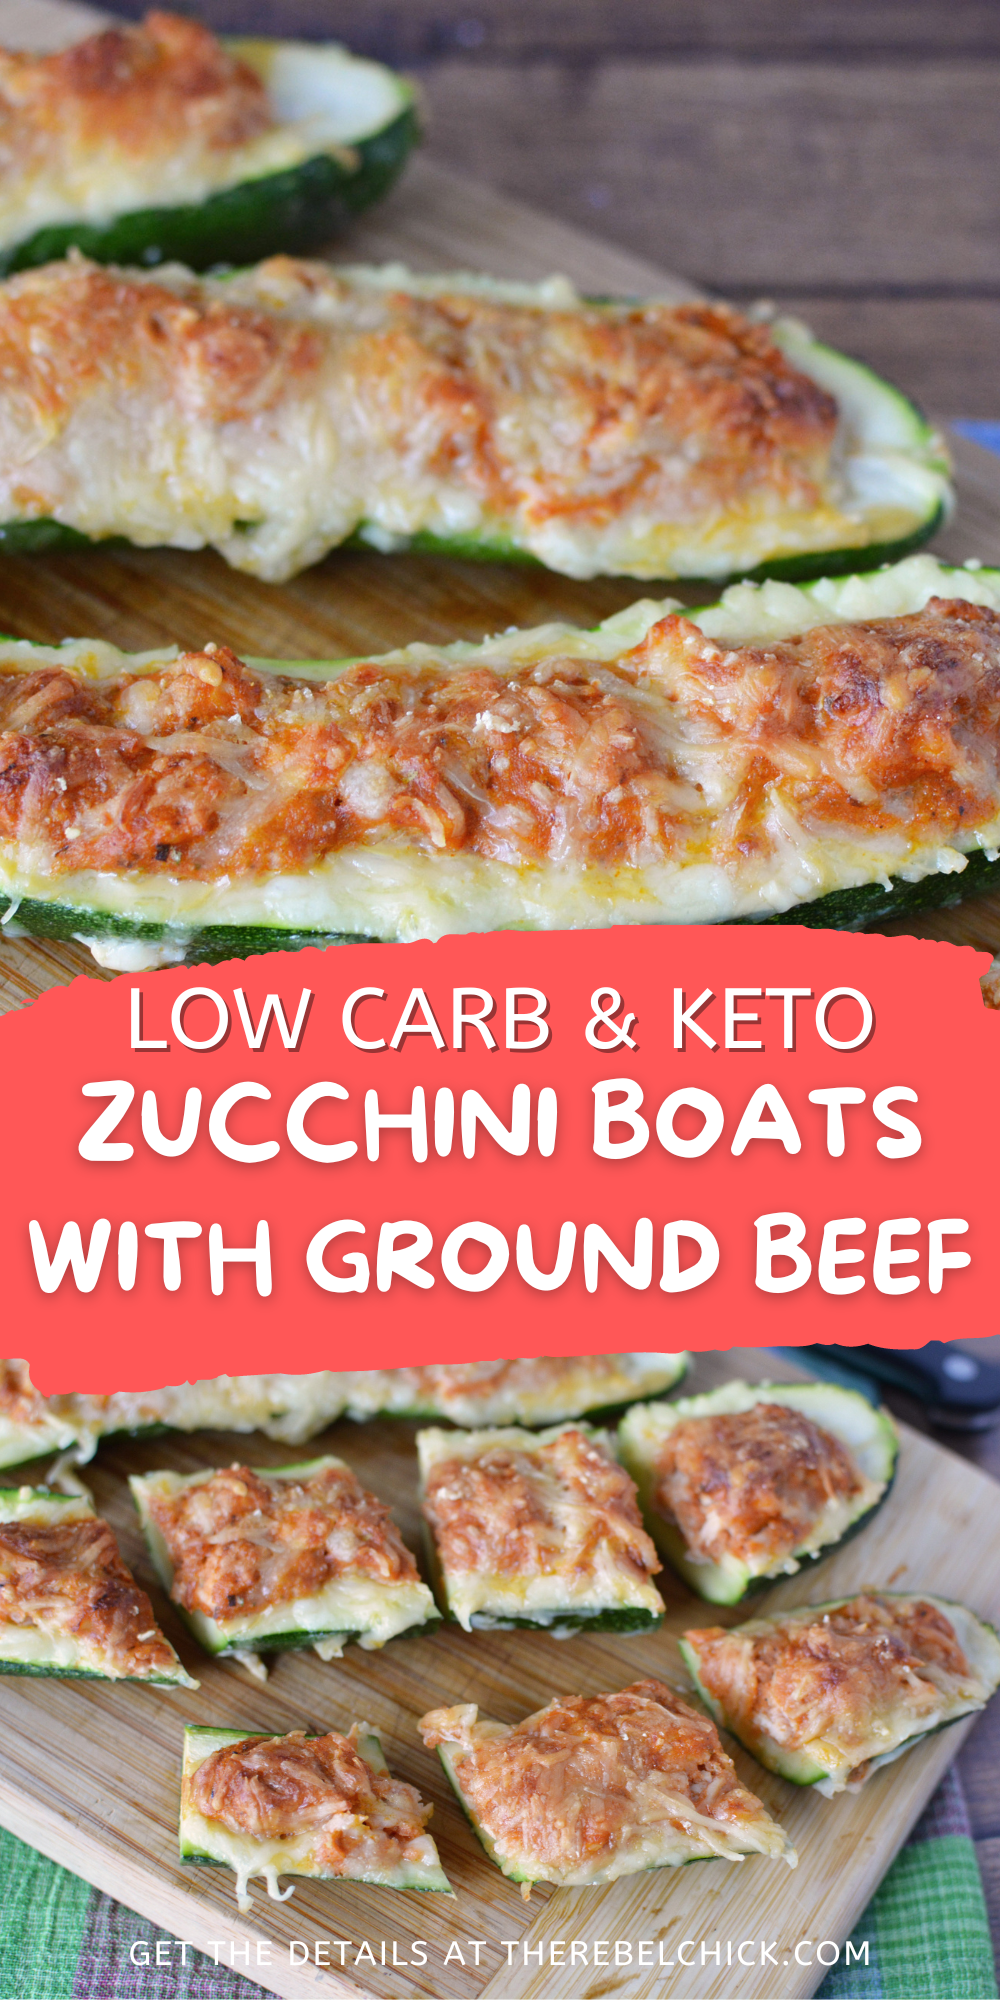 Zucchini Boats With Ground Beef